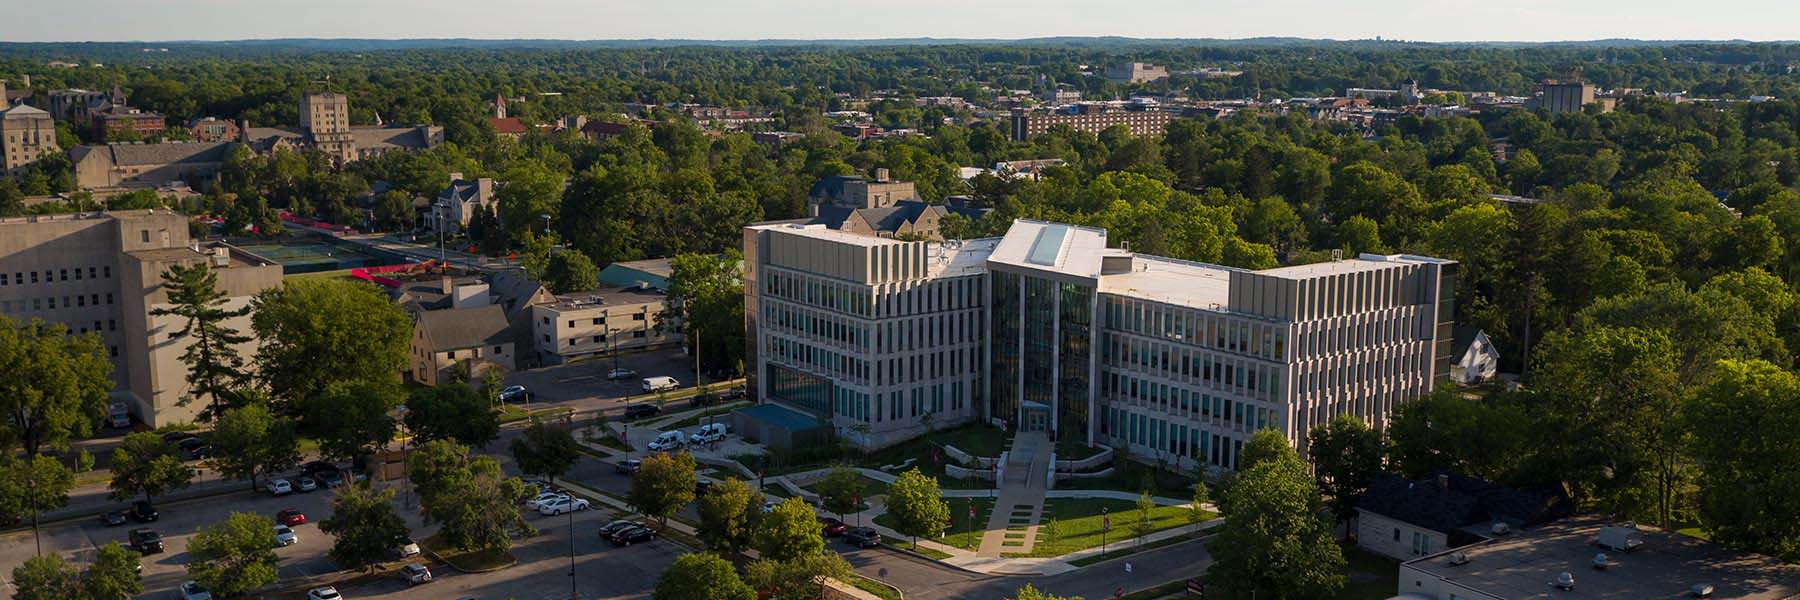 An aerial view of the exterior of the Luddy Hall academic building